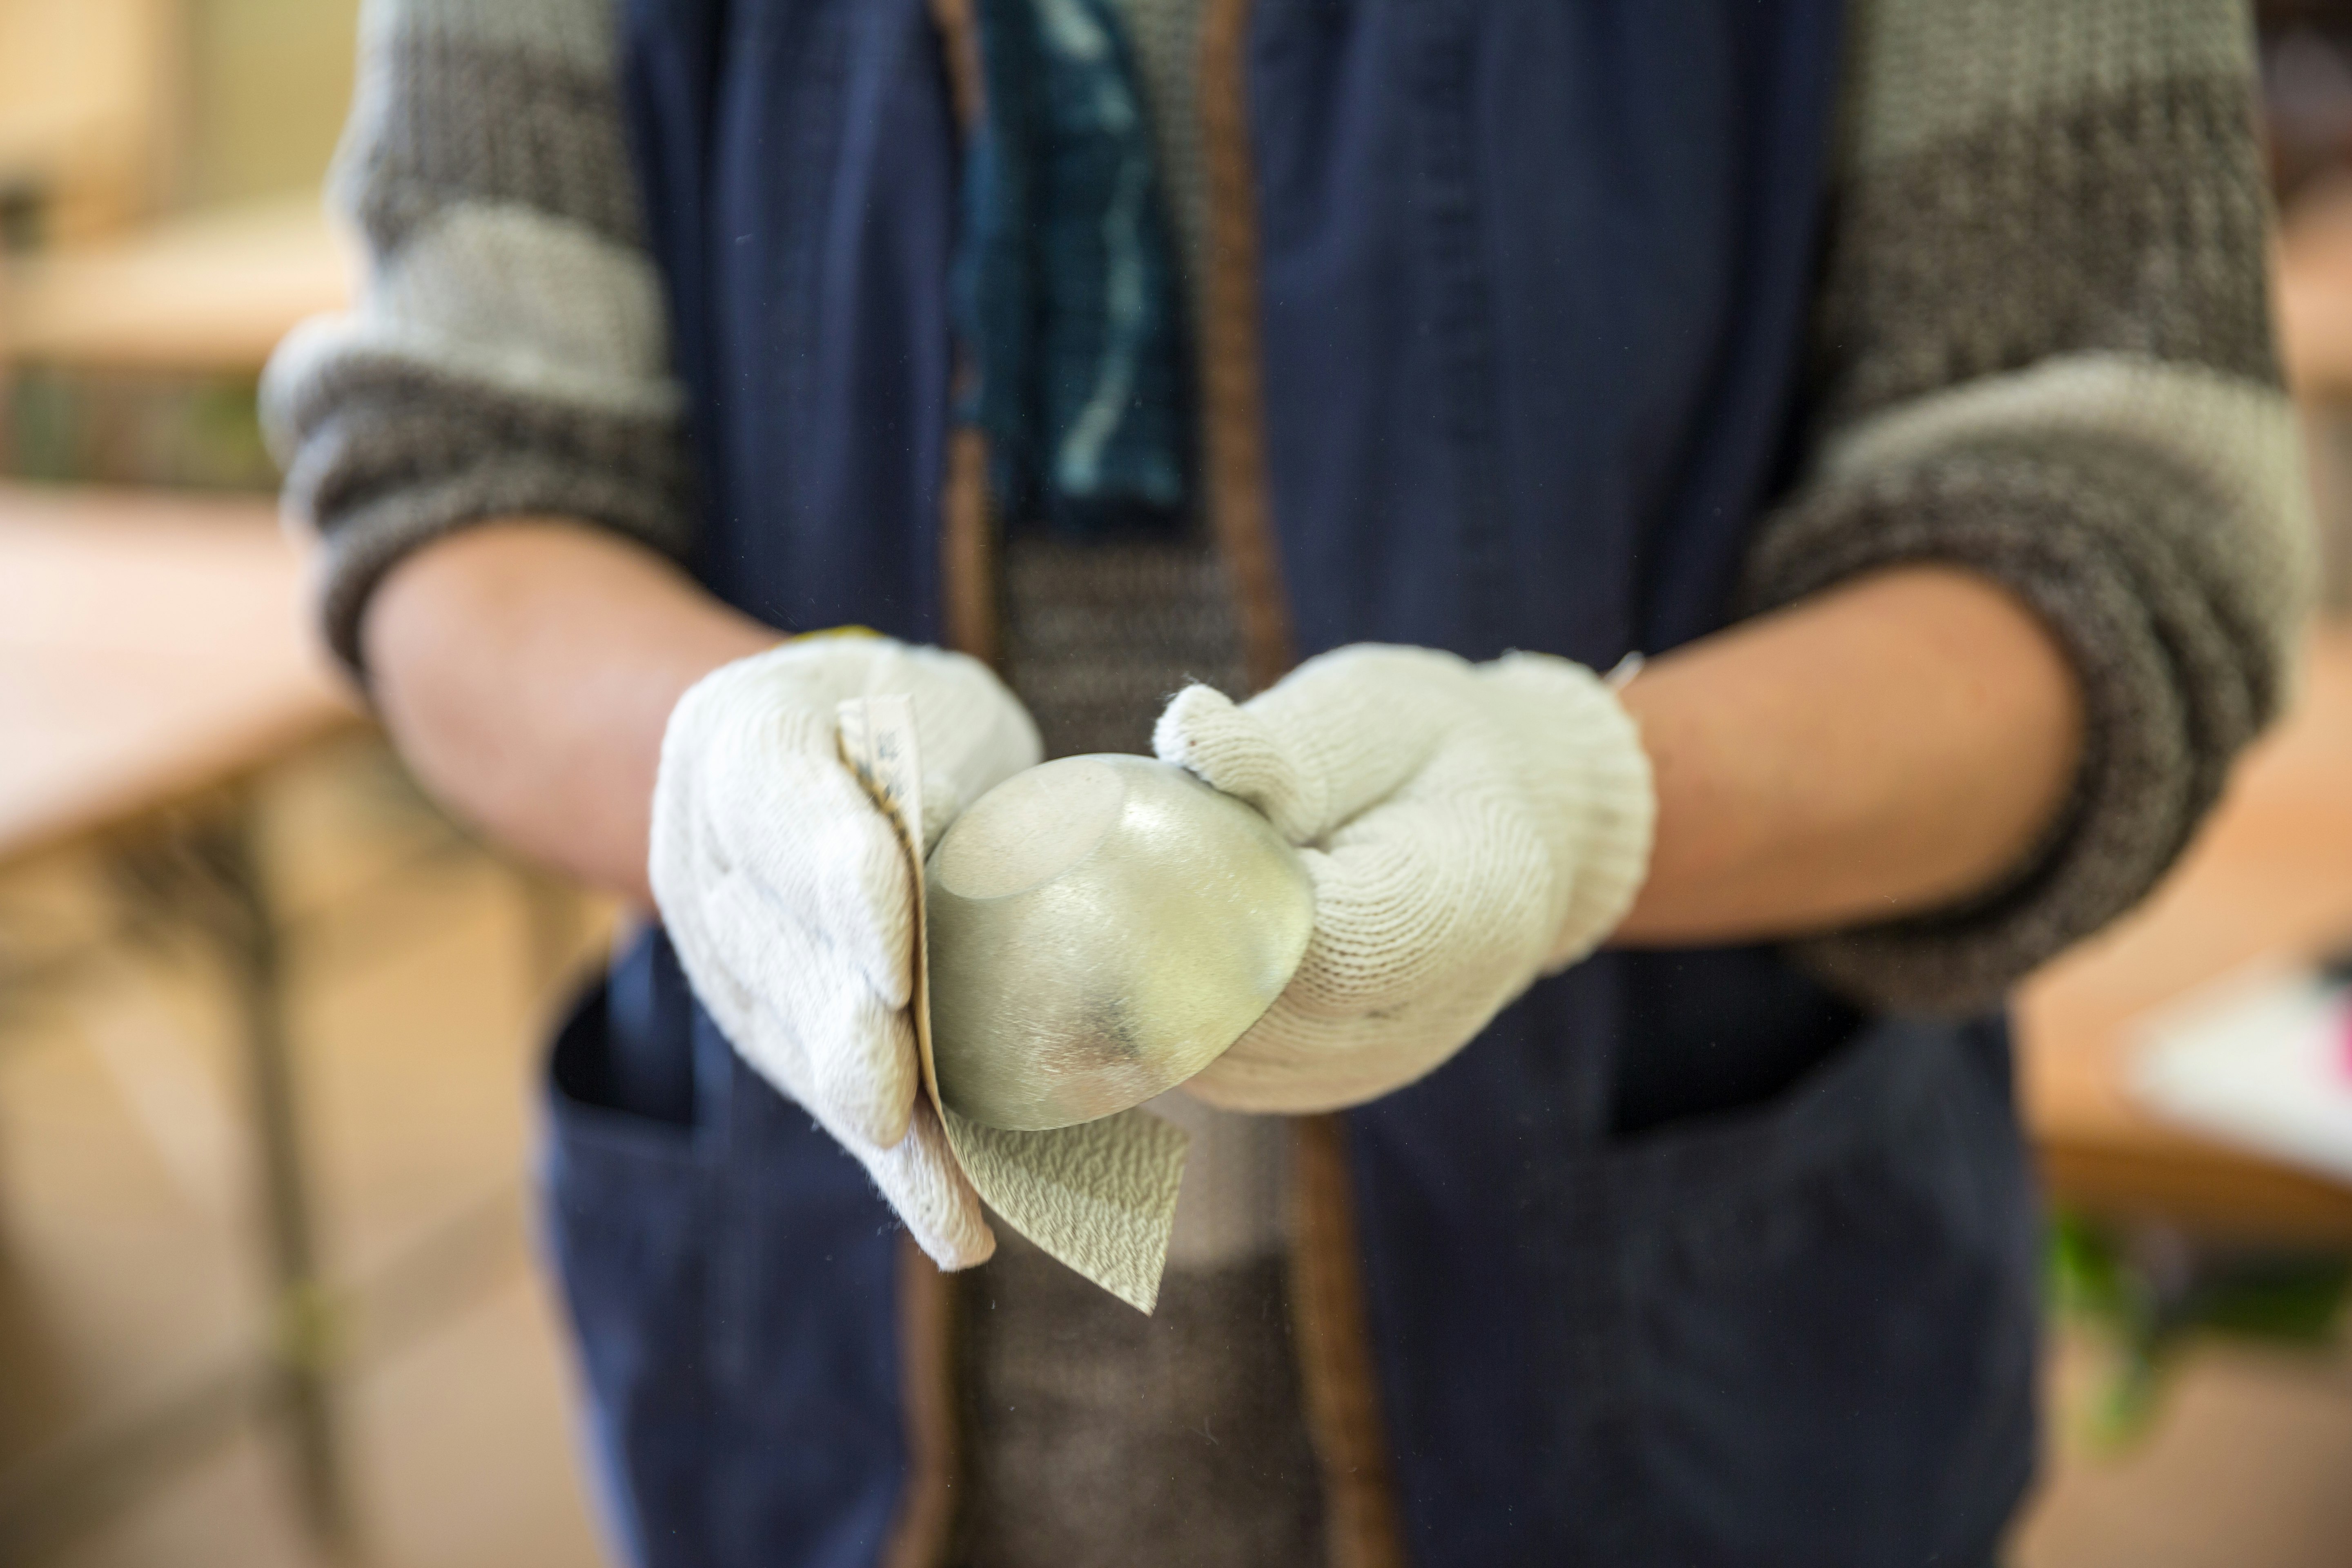 A close-up image of gloved hands sanding down a copper sake cup